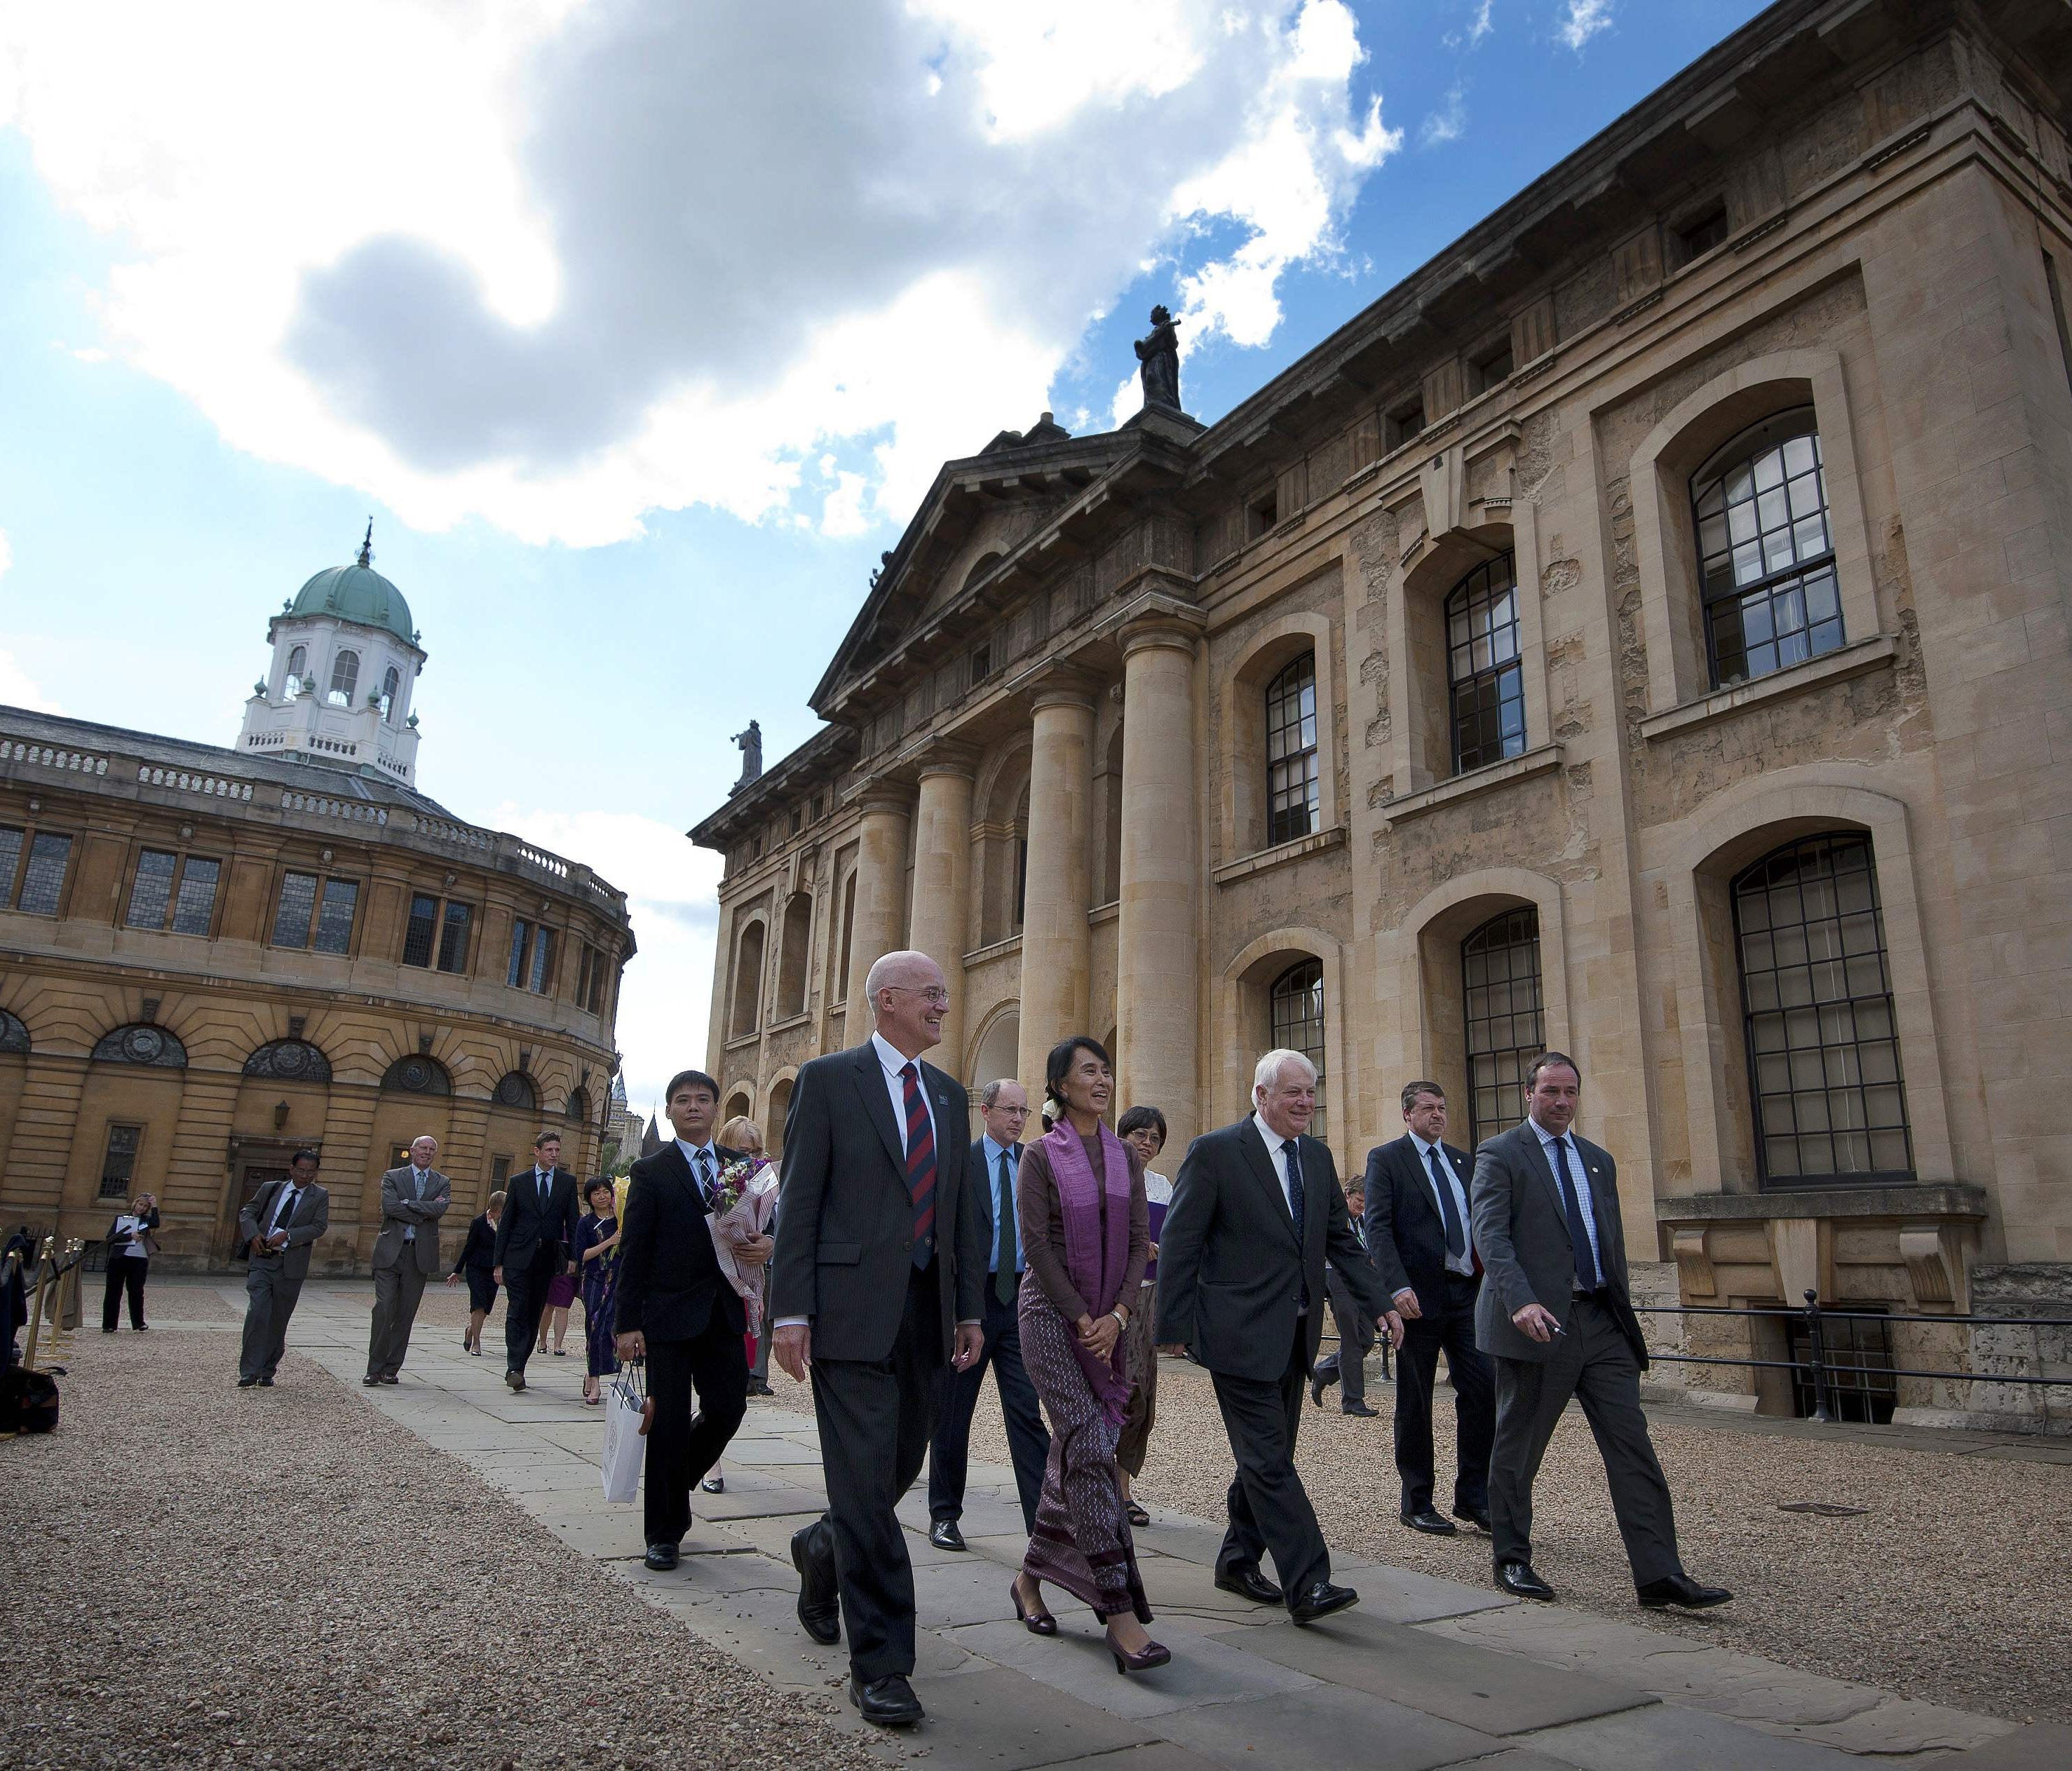 This file photo taken on June 19, 2012 shows Myanmar leader Aung San Suu Kyi as she leaves after visiting the Bodleian Libraries at Oxford University in Oxford, northwest of London.